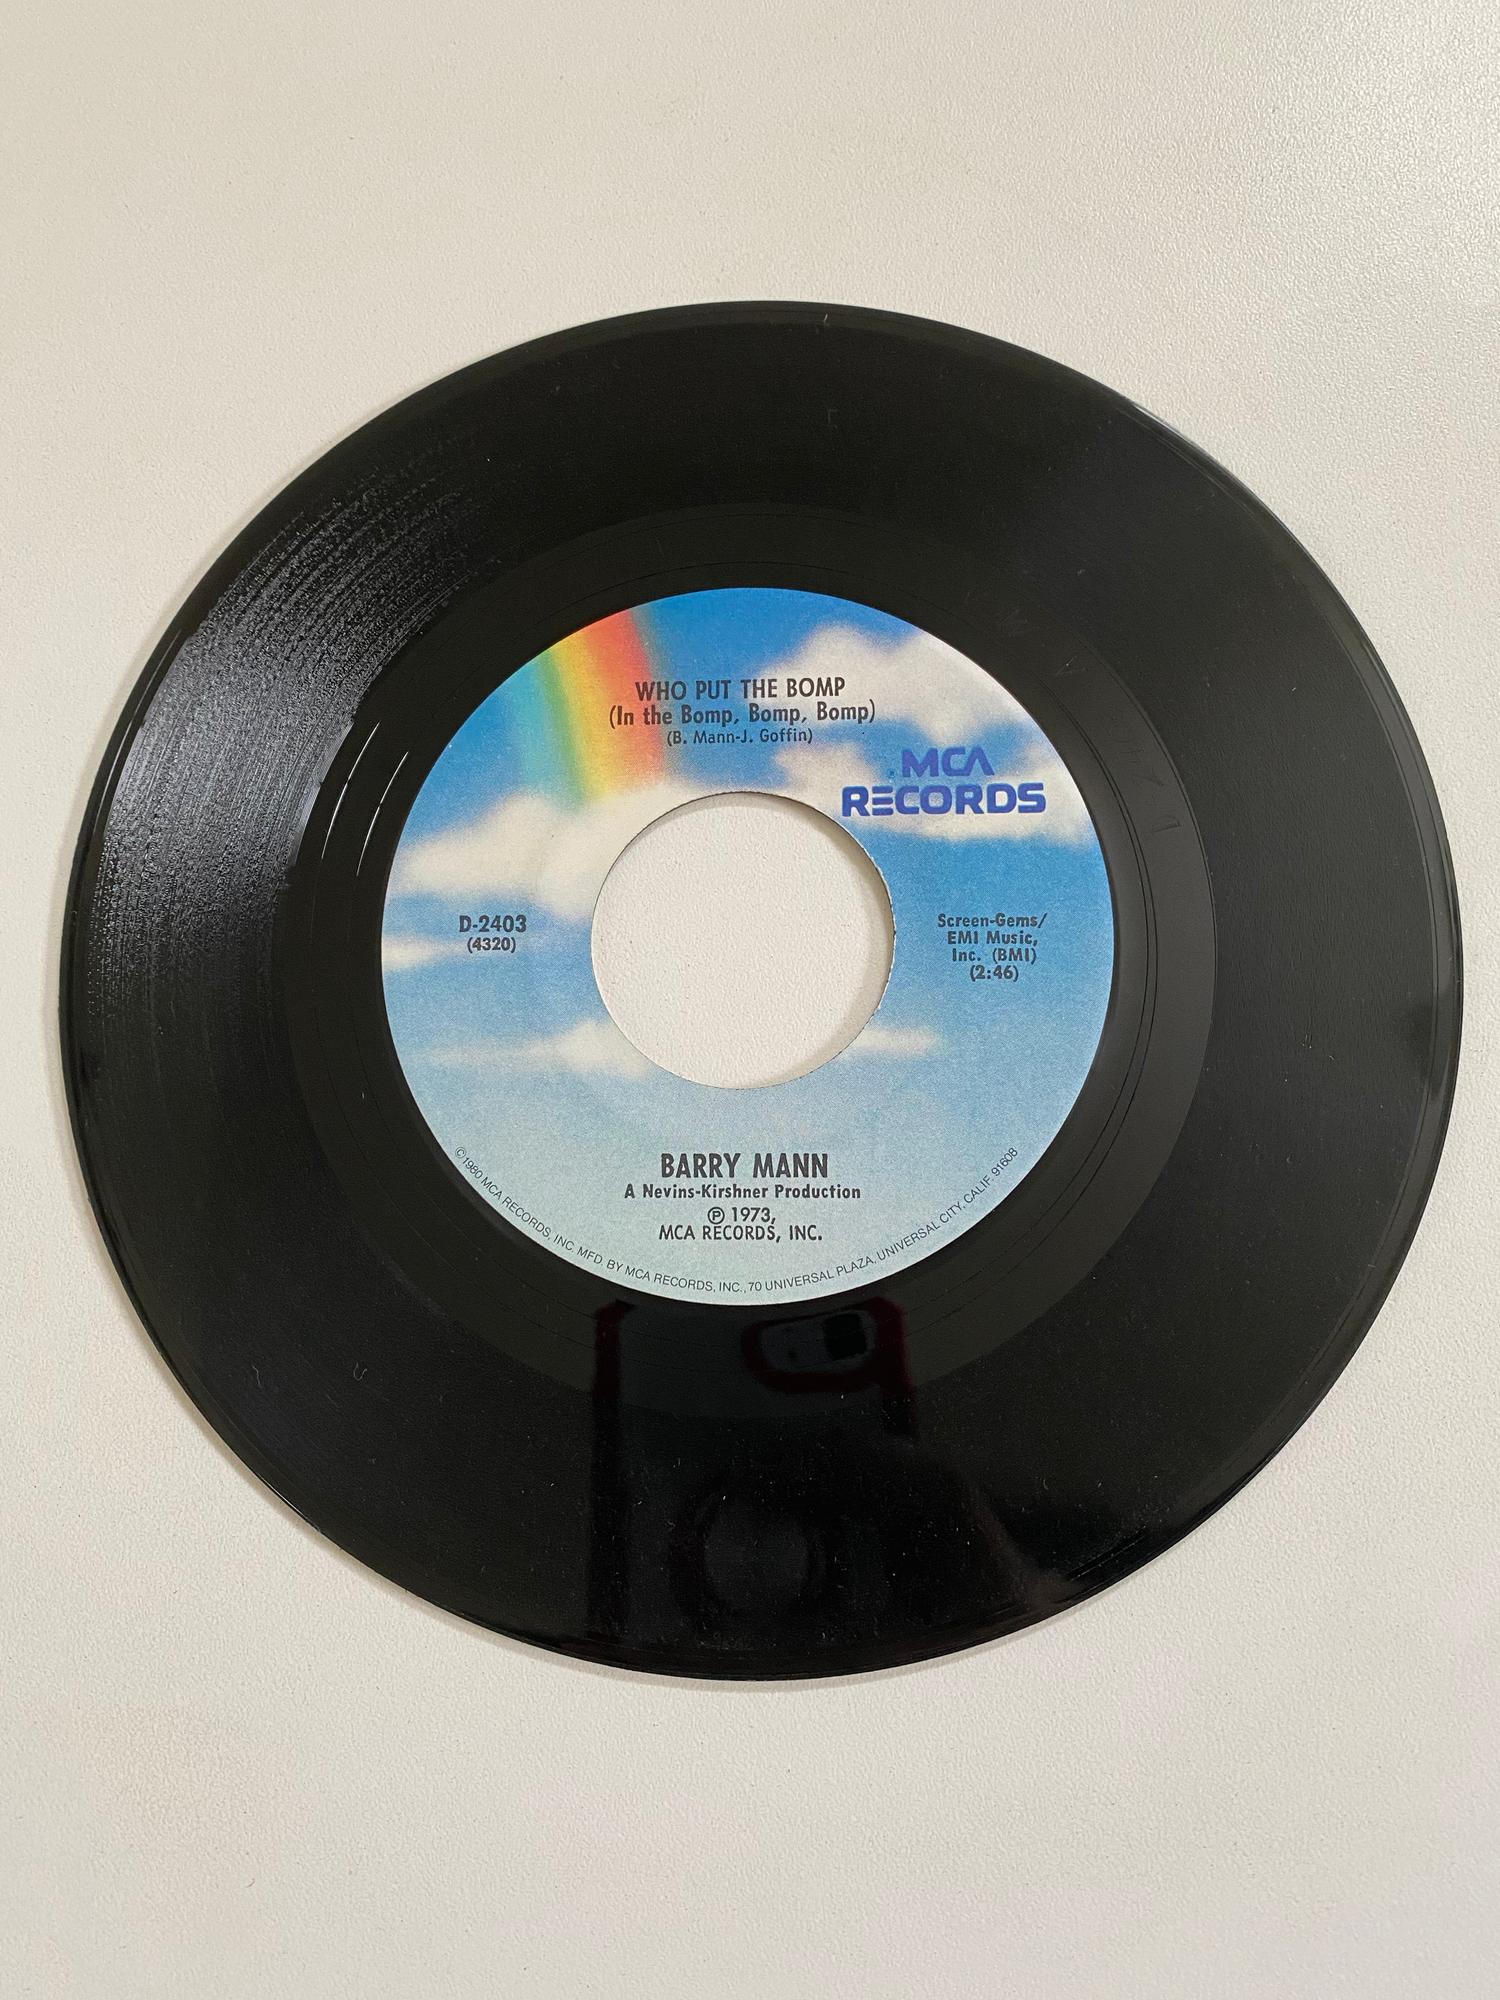 Brian Hyland - Sealed With a Kiss | 45 The Vintedge Co.